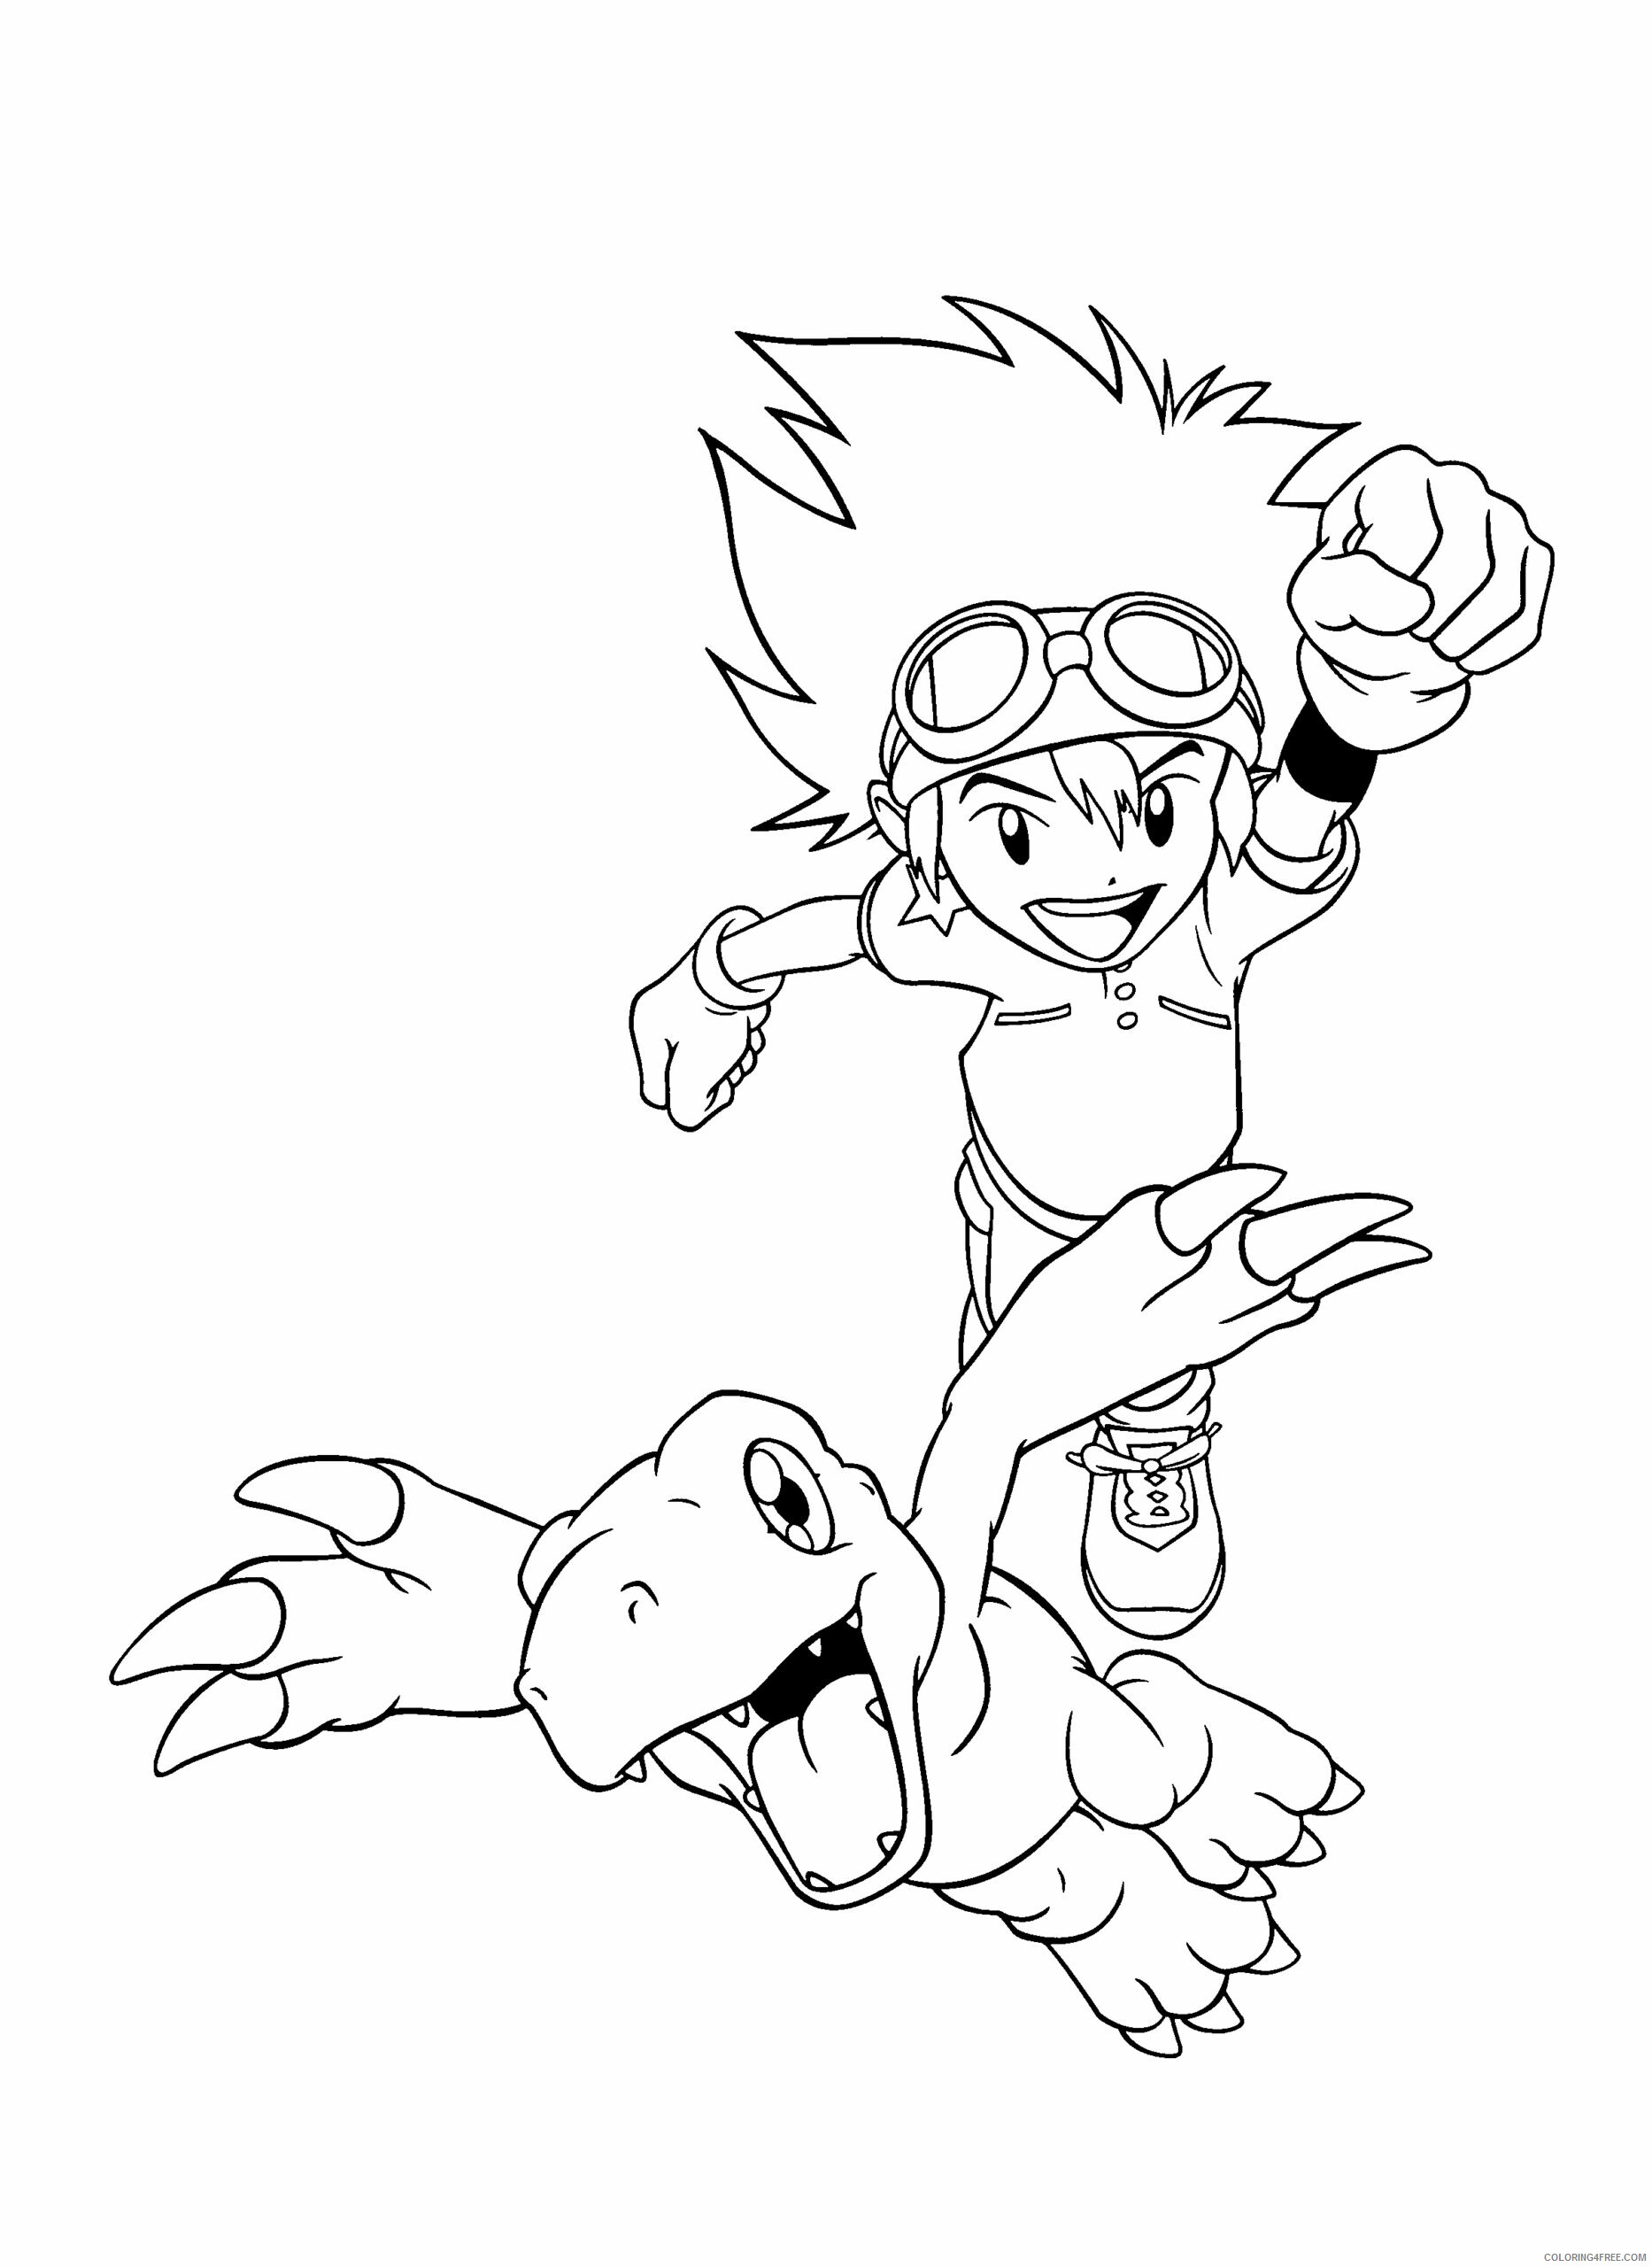 Digimon Printable Coloring Pages Anime digimon b4lr6 2021 0161 Coloring4free